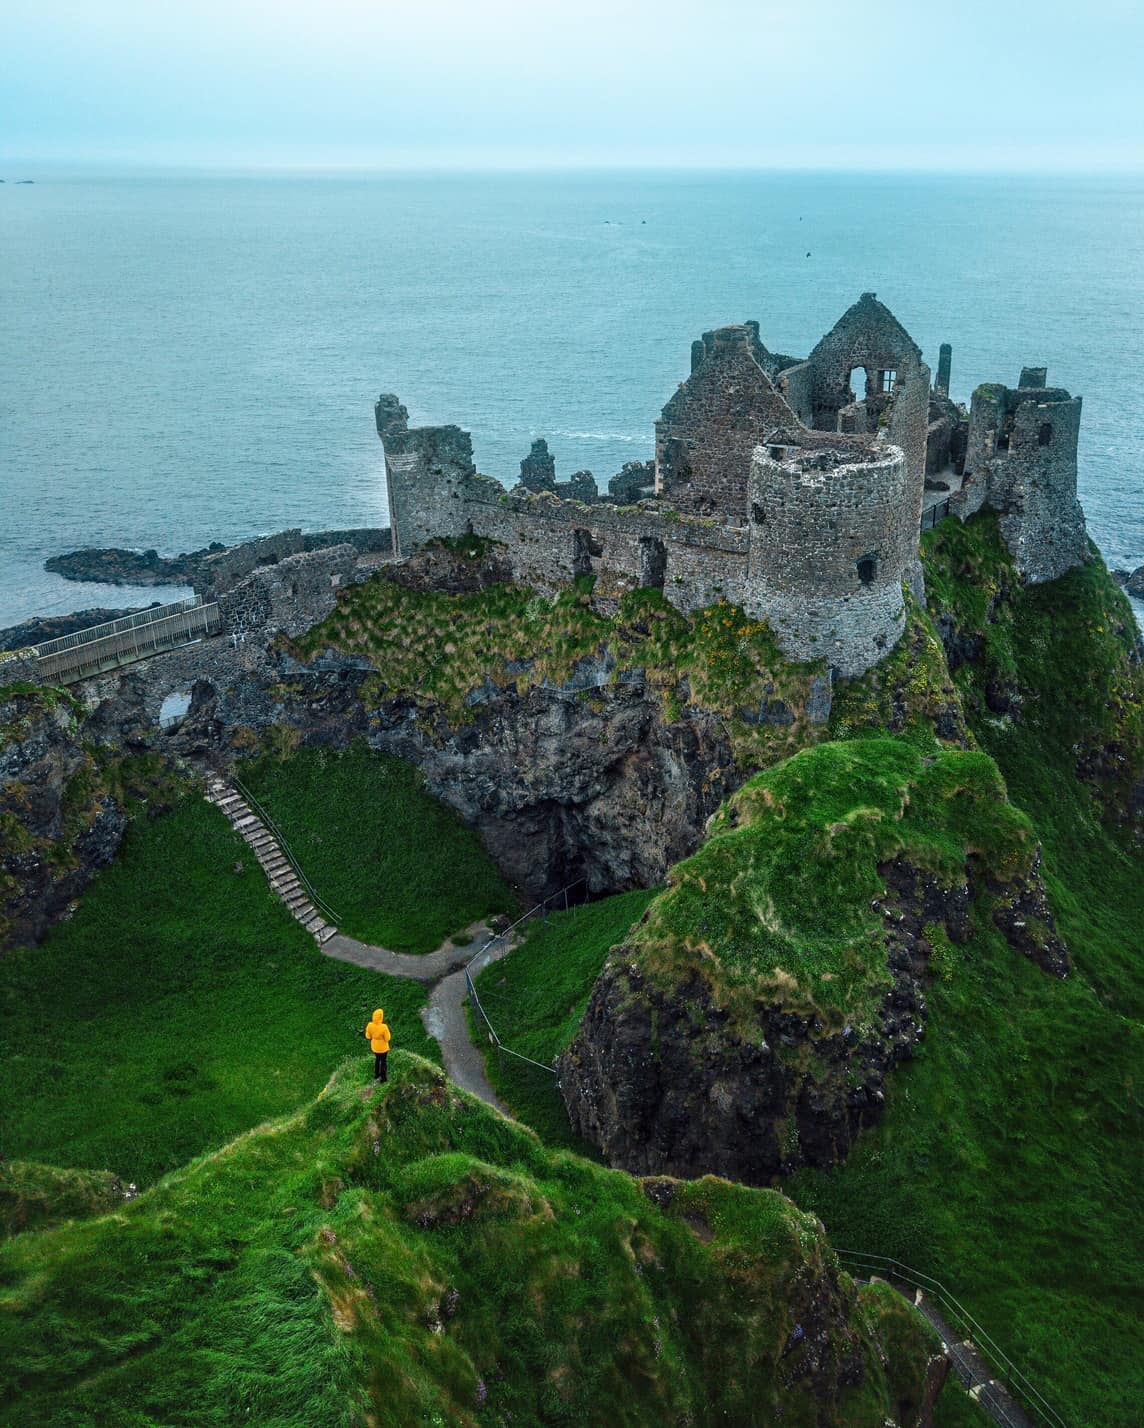 Figure in a yellow raincoat standing on a grass hill overlooking the stone ruins of the Dunluce Castle on the coast during an Ireland road trip.